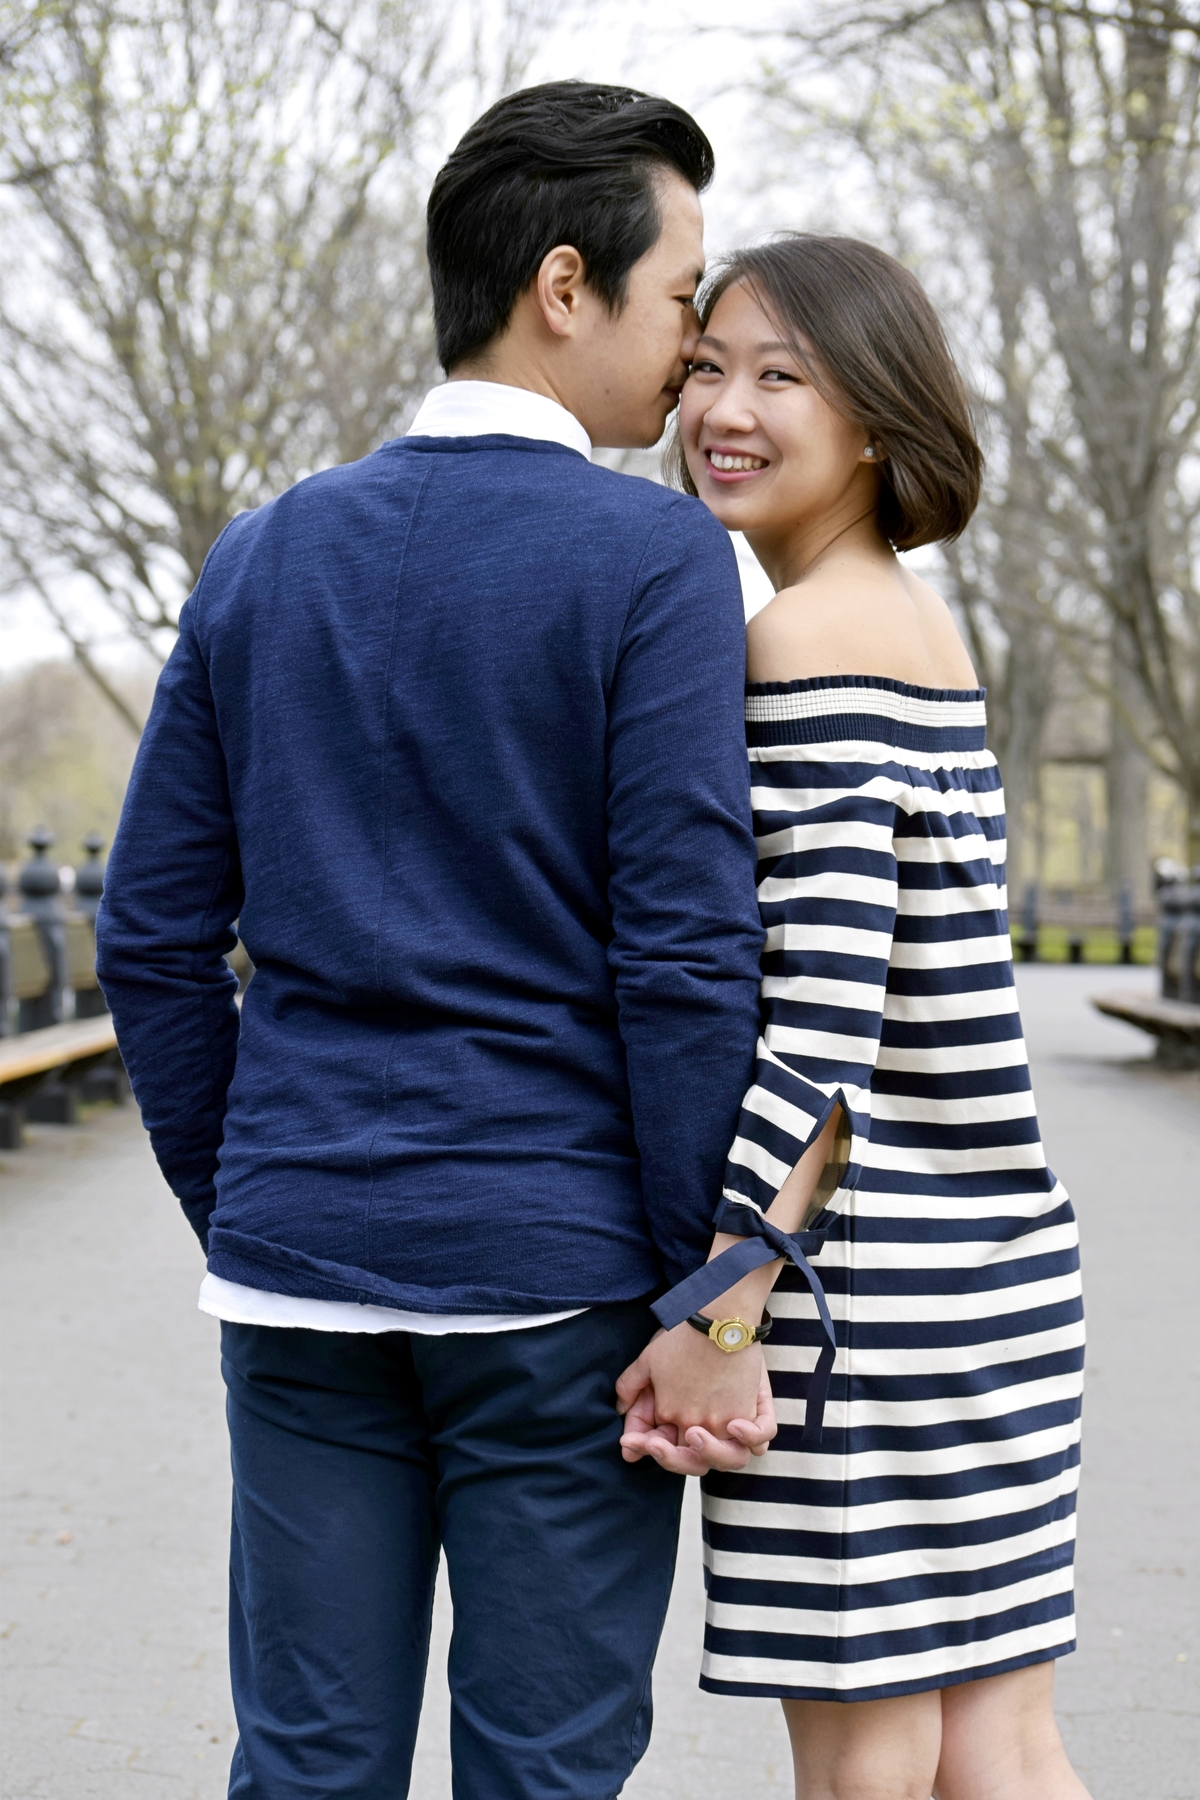  Literary Walk Central Park Engagement Session Photography NYC Connecticut, catholic photographer 